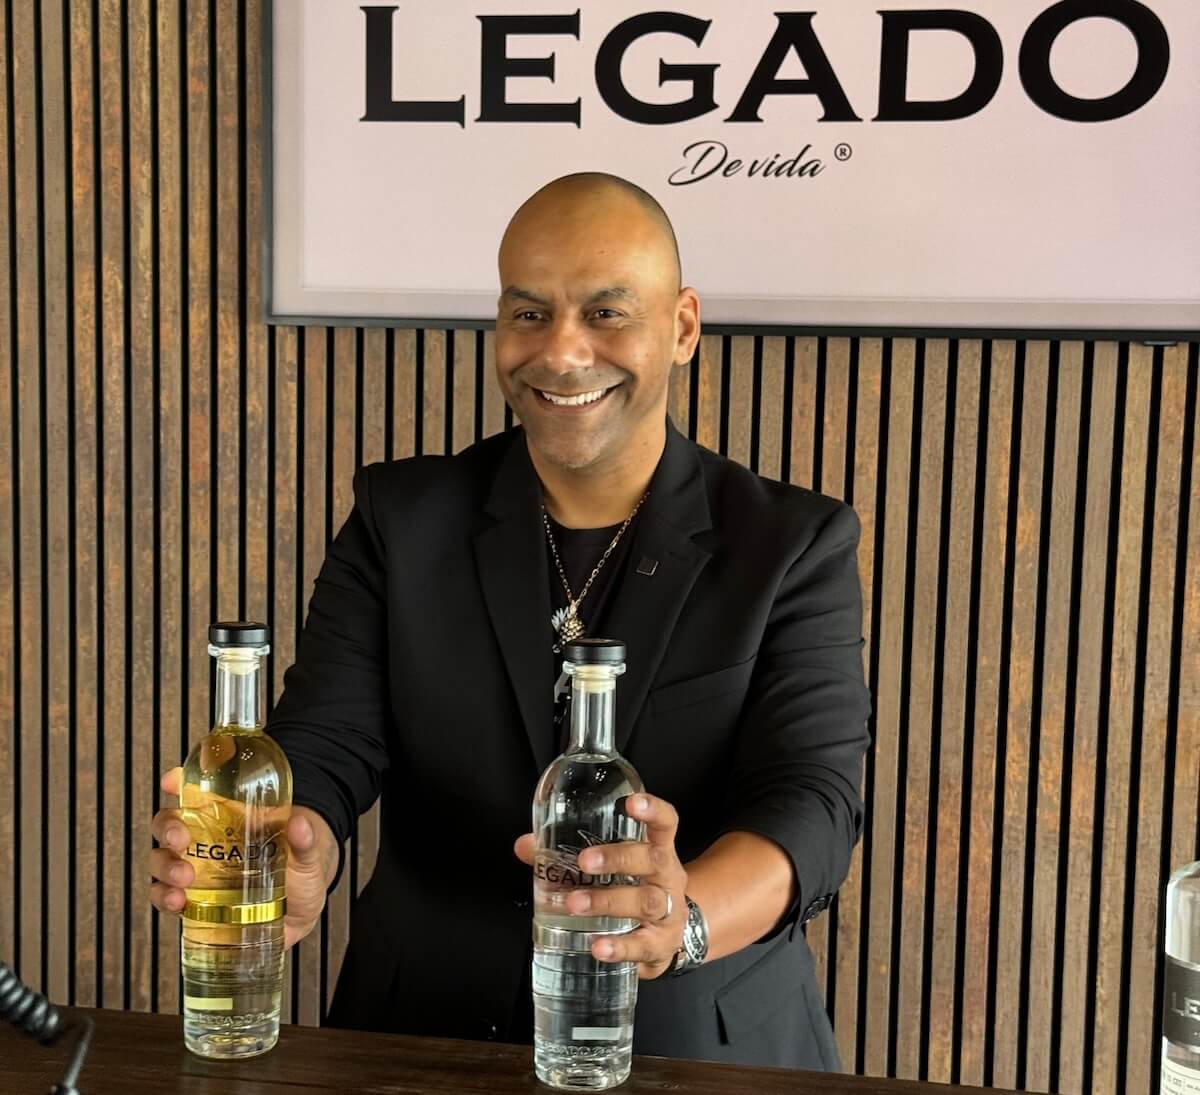 El Gran Legado De Vida: Crafting Luxury in Every Sip, A Tribute to Tequila’s Rich History and Lifestyle